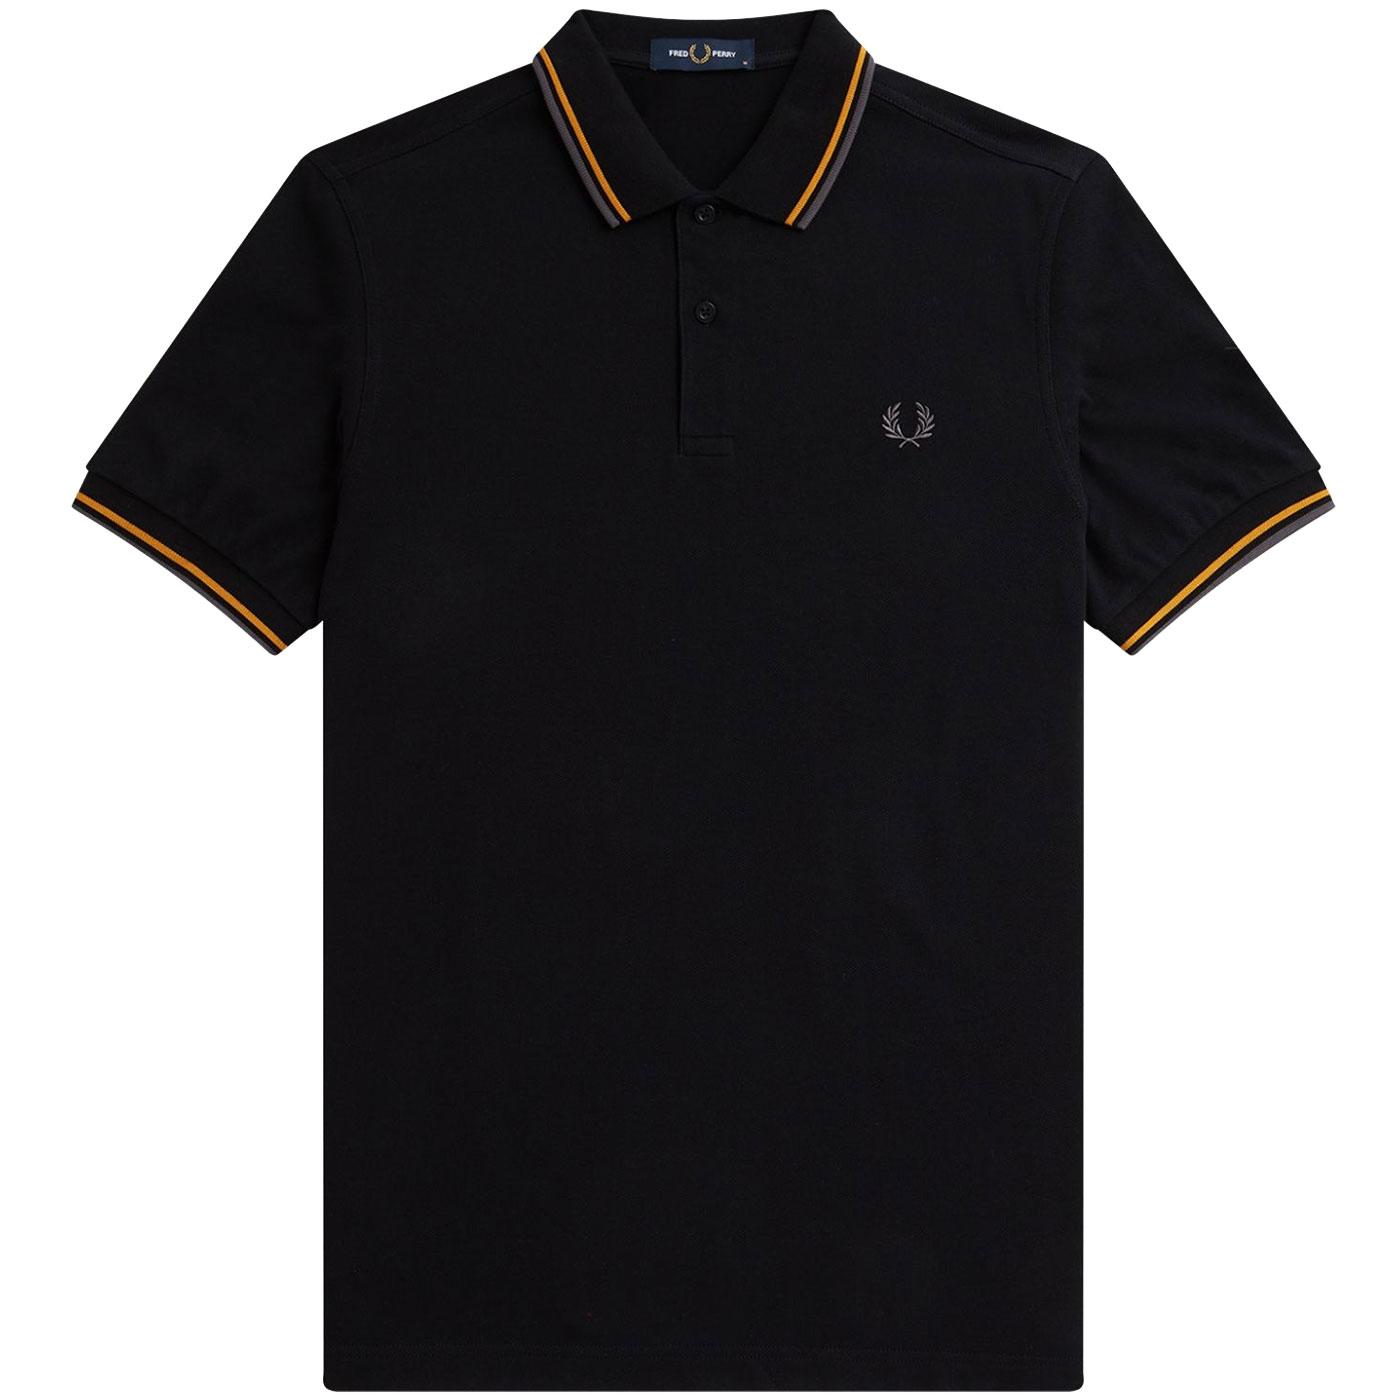 FRED PERRY M3600 Mod Twin Tipped Polo Shirt B/G/G